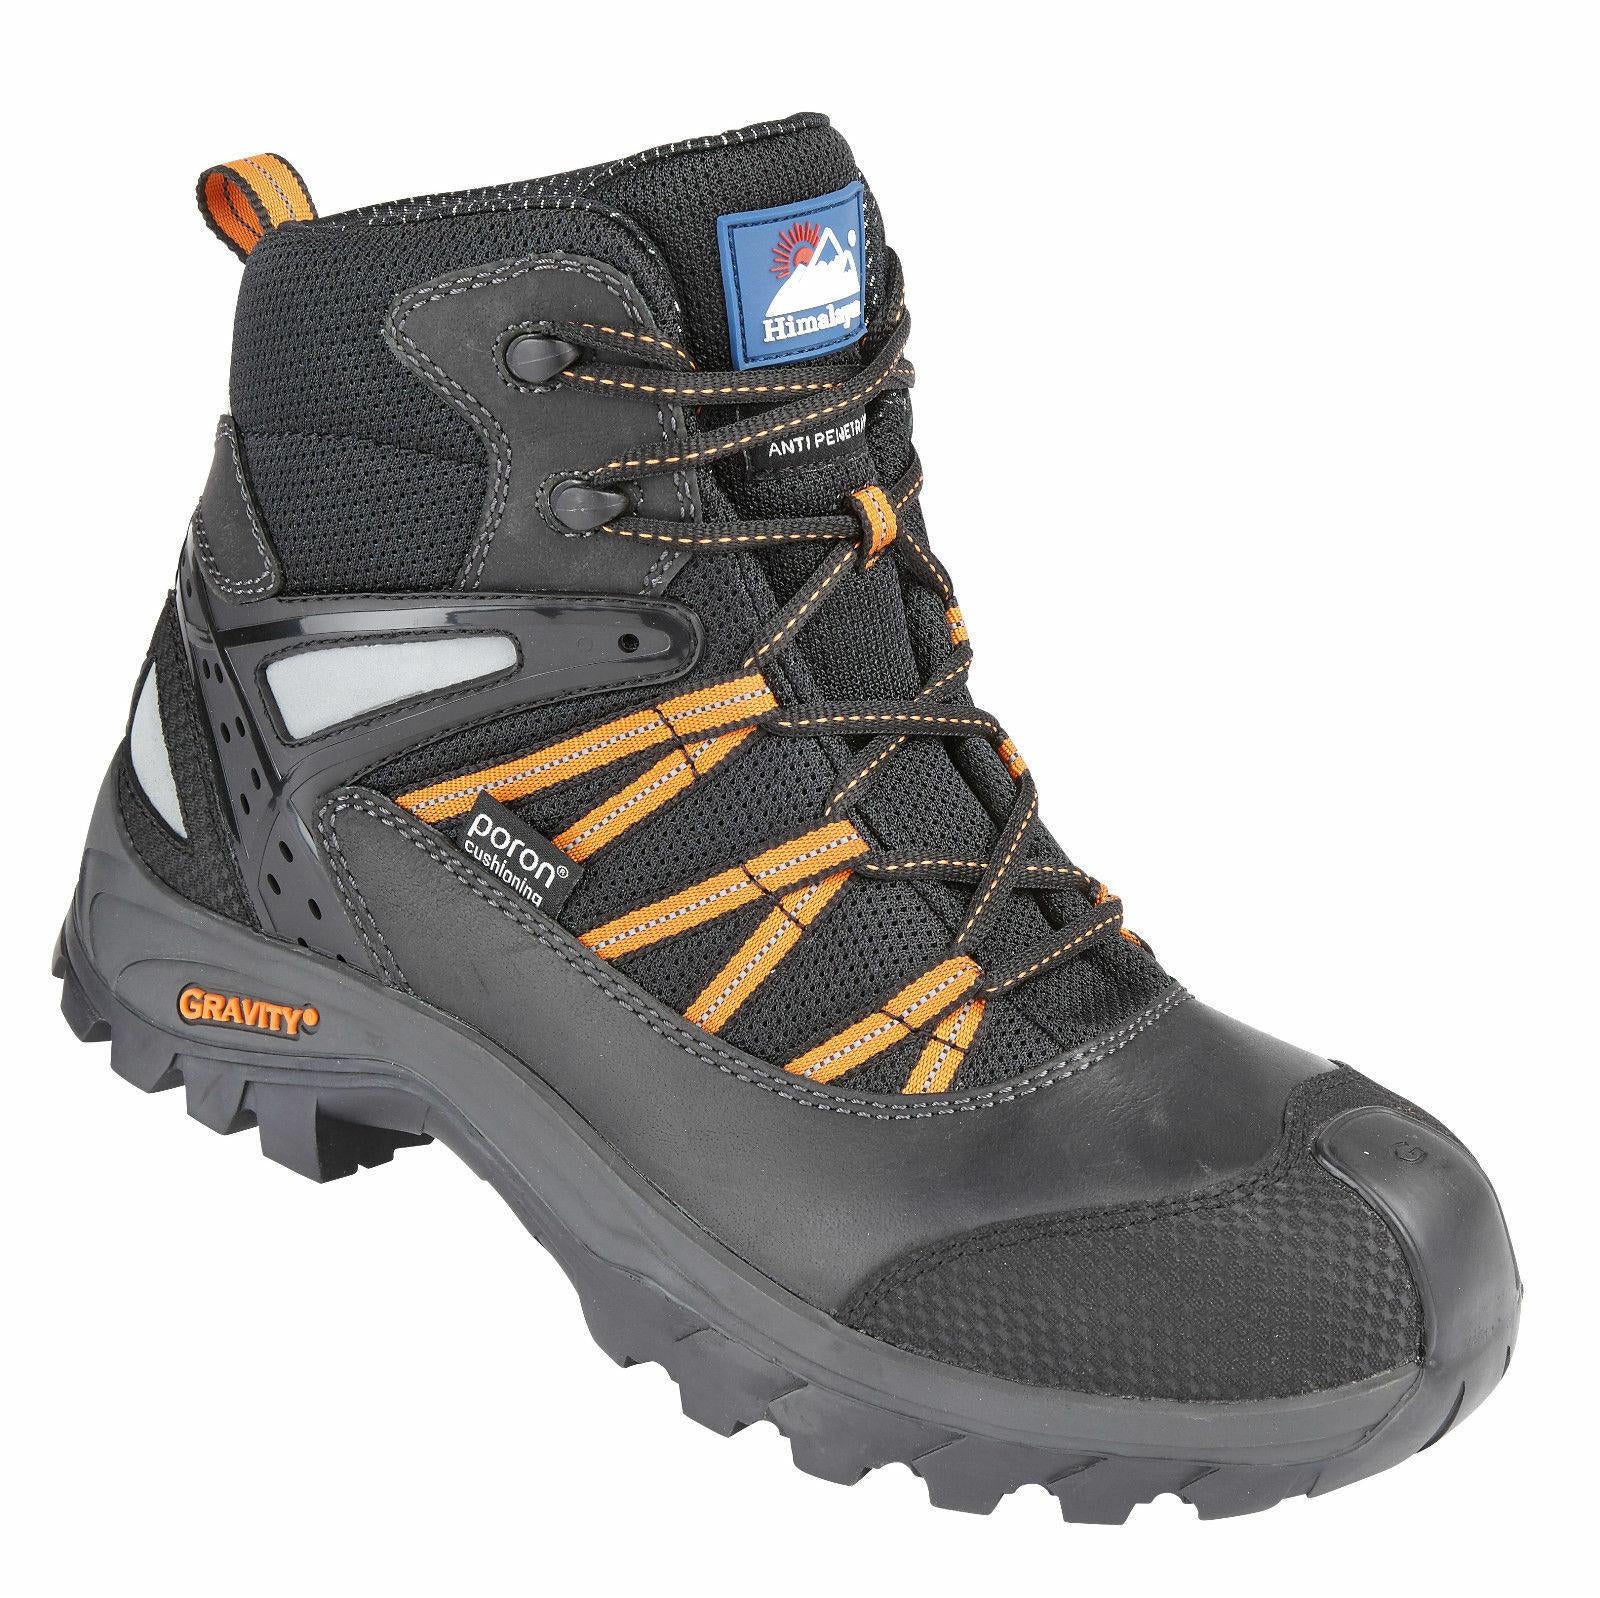 Himalayan Gravity S3 waterproof composite toe/midsole safety boot #4122